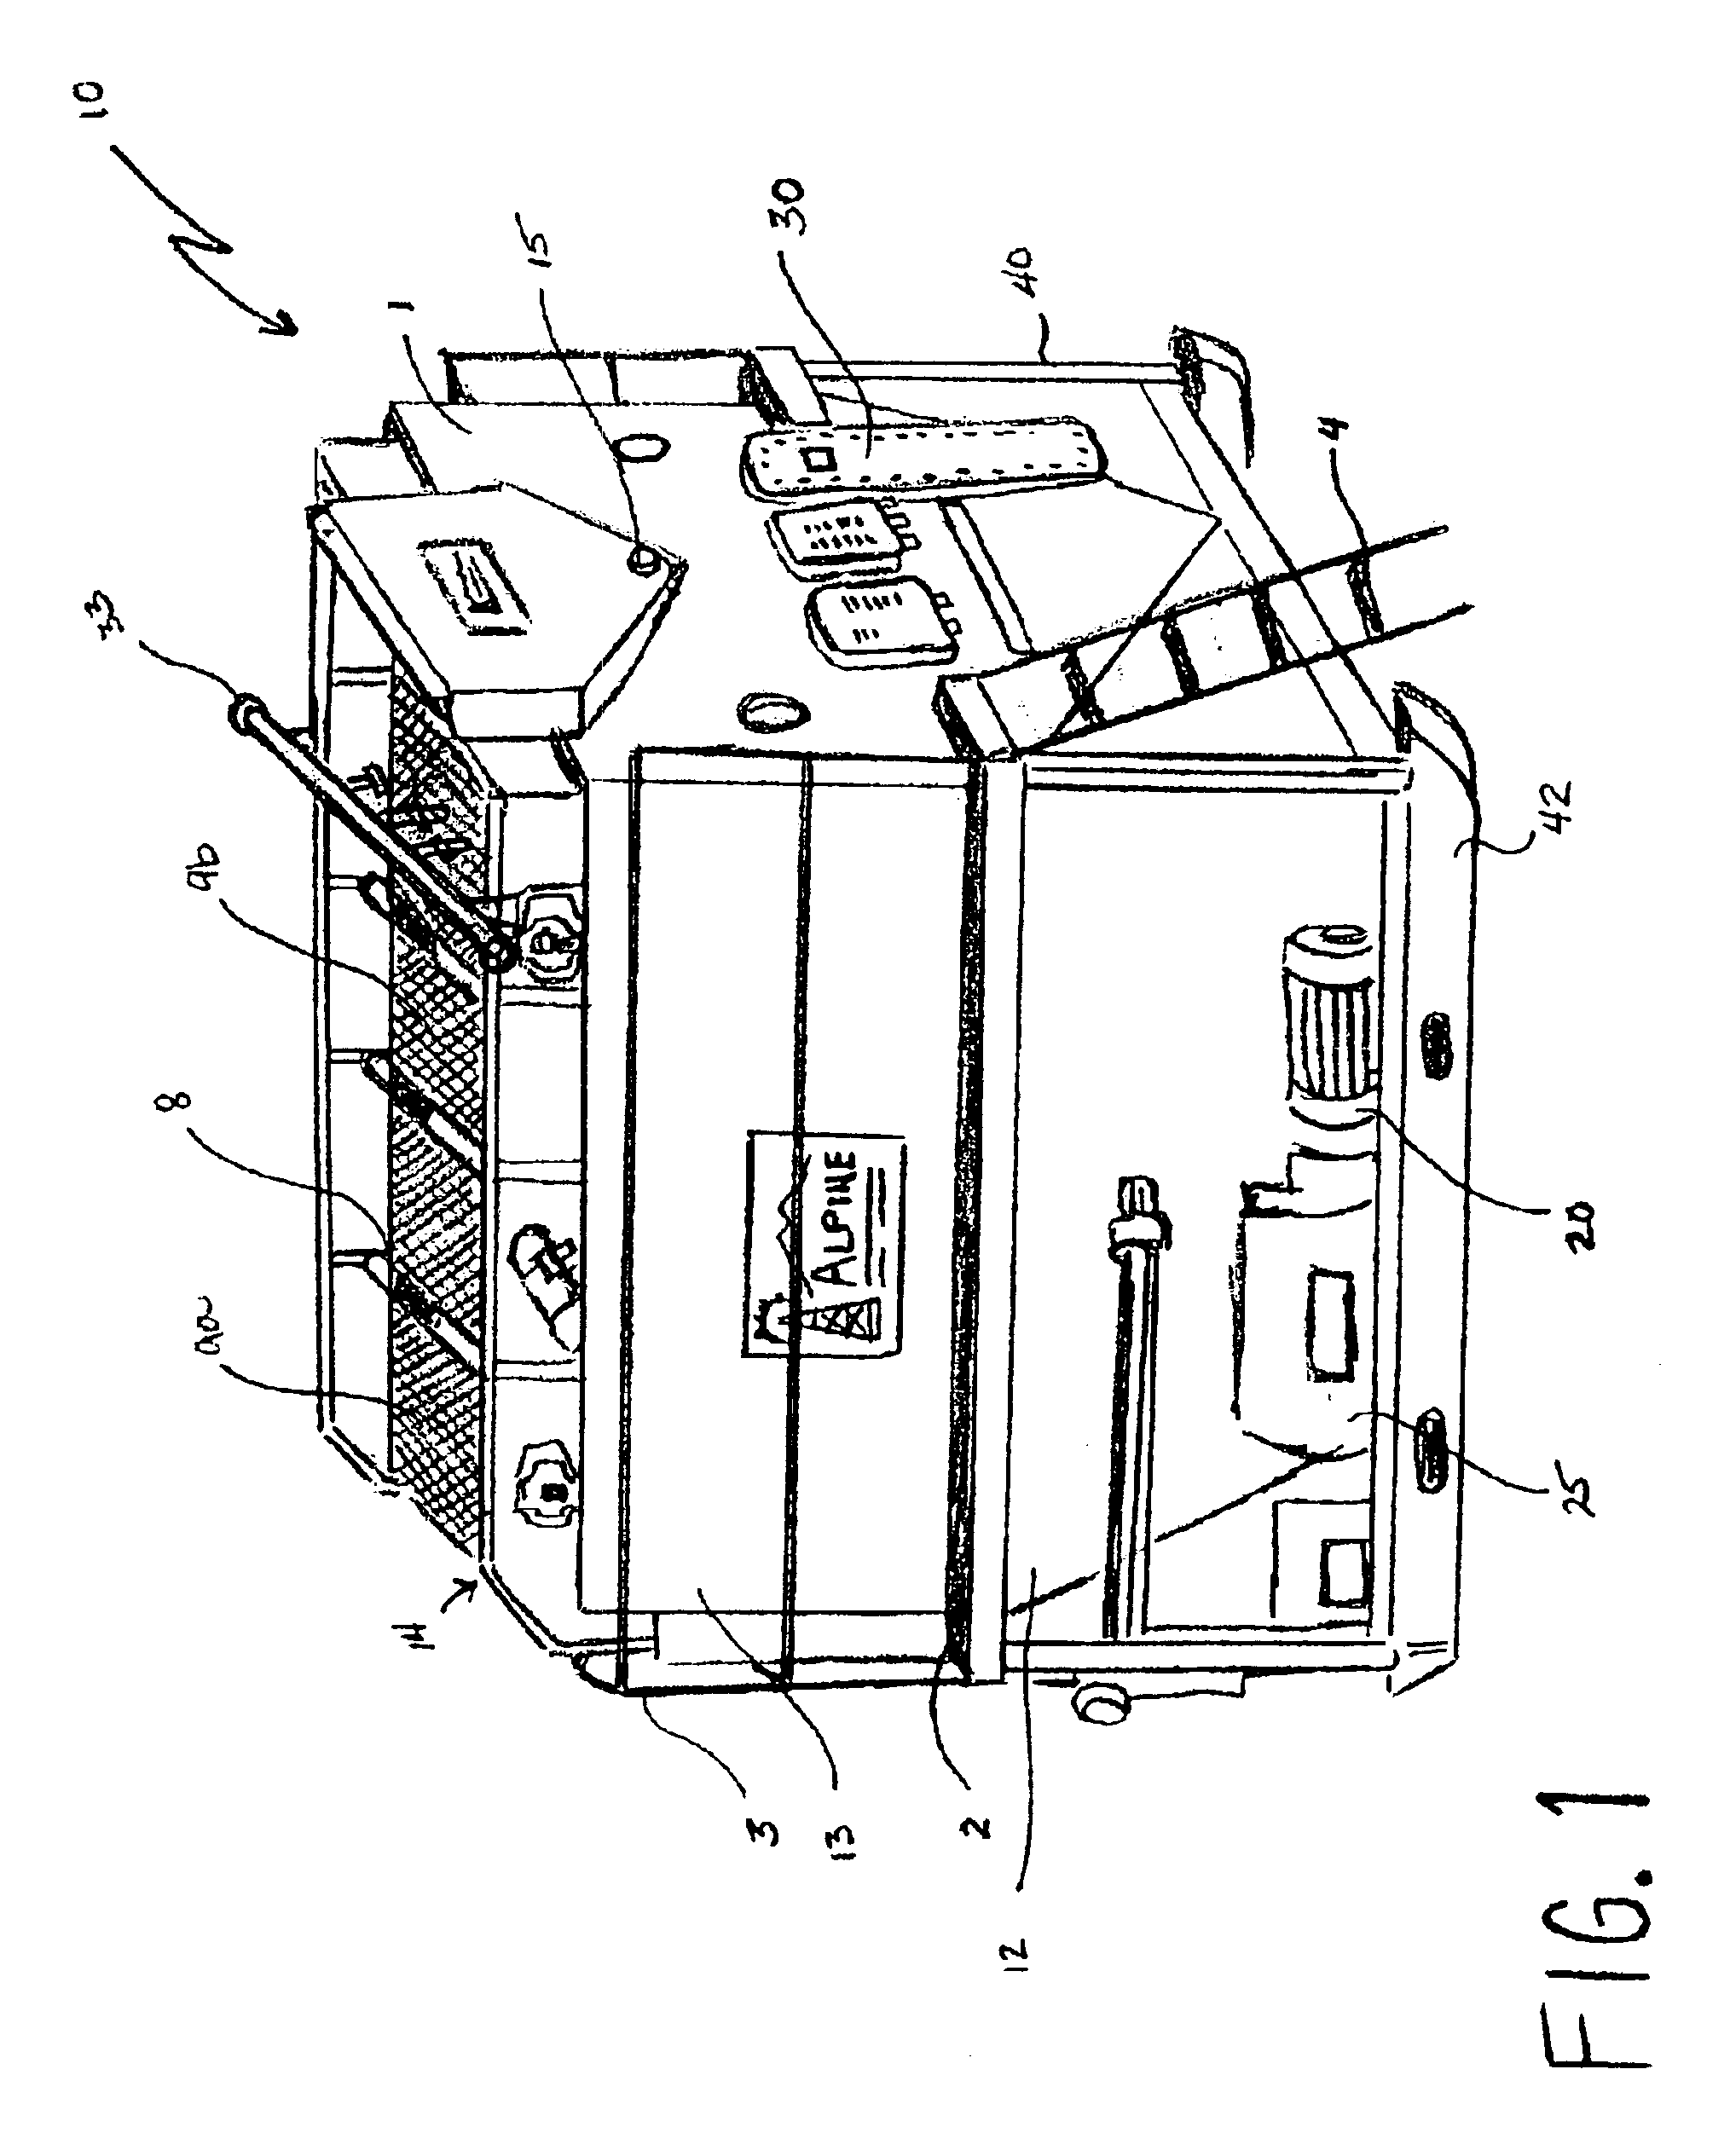 Polymer drilling bead recovery system and related methods